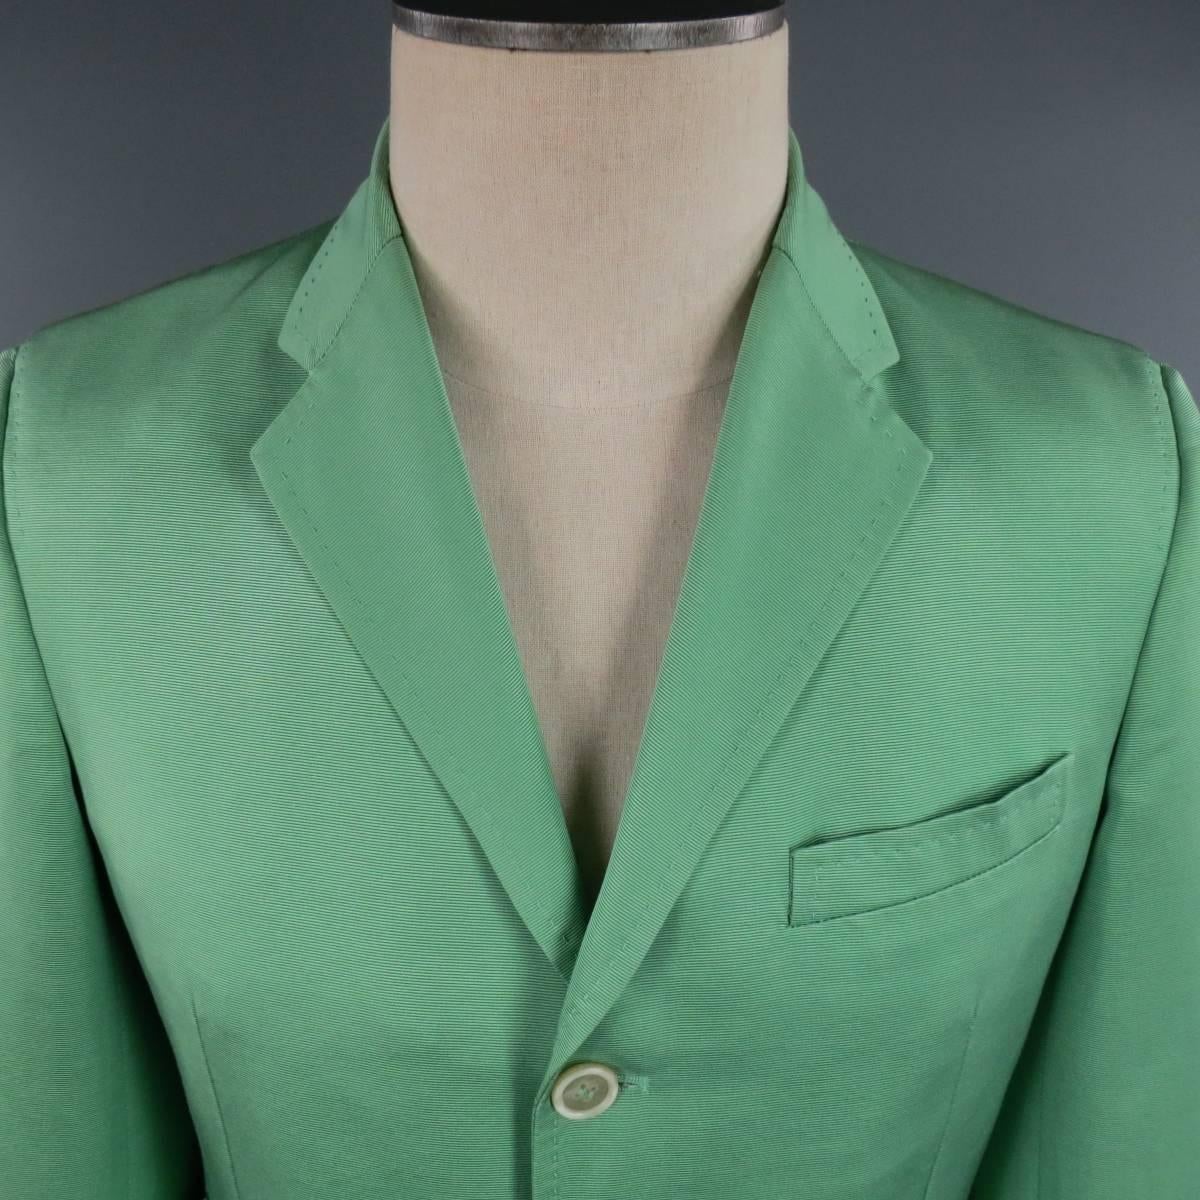 This chic DSQUARED2 sport coat comes in light green cotton silk blend ribbon textured faille fabric with a three button closure, notch lapel, triple flap pocket front, functional button sleeves, single back vent and top stitching detail throughout.